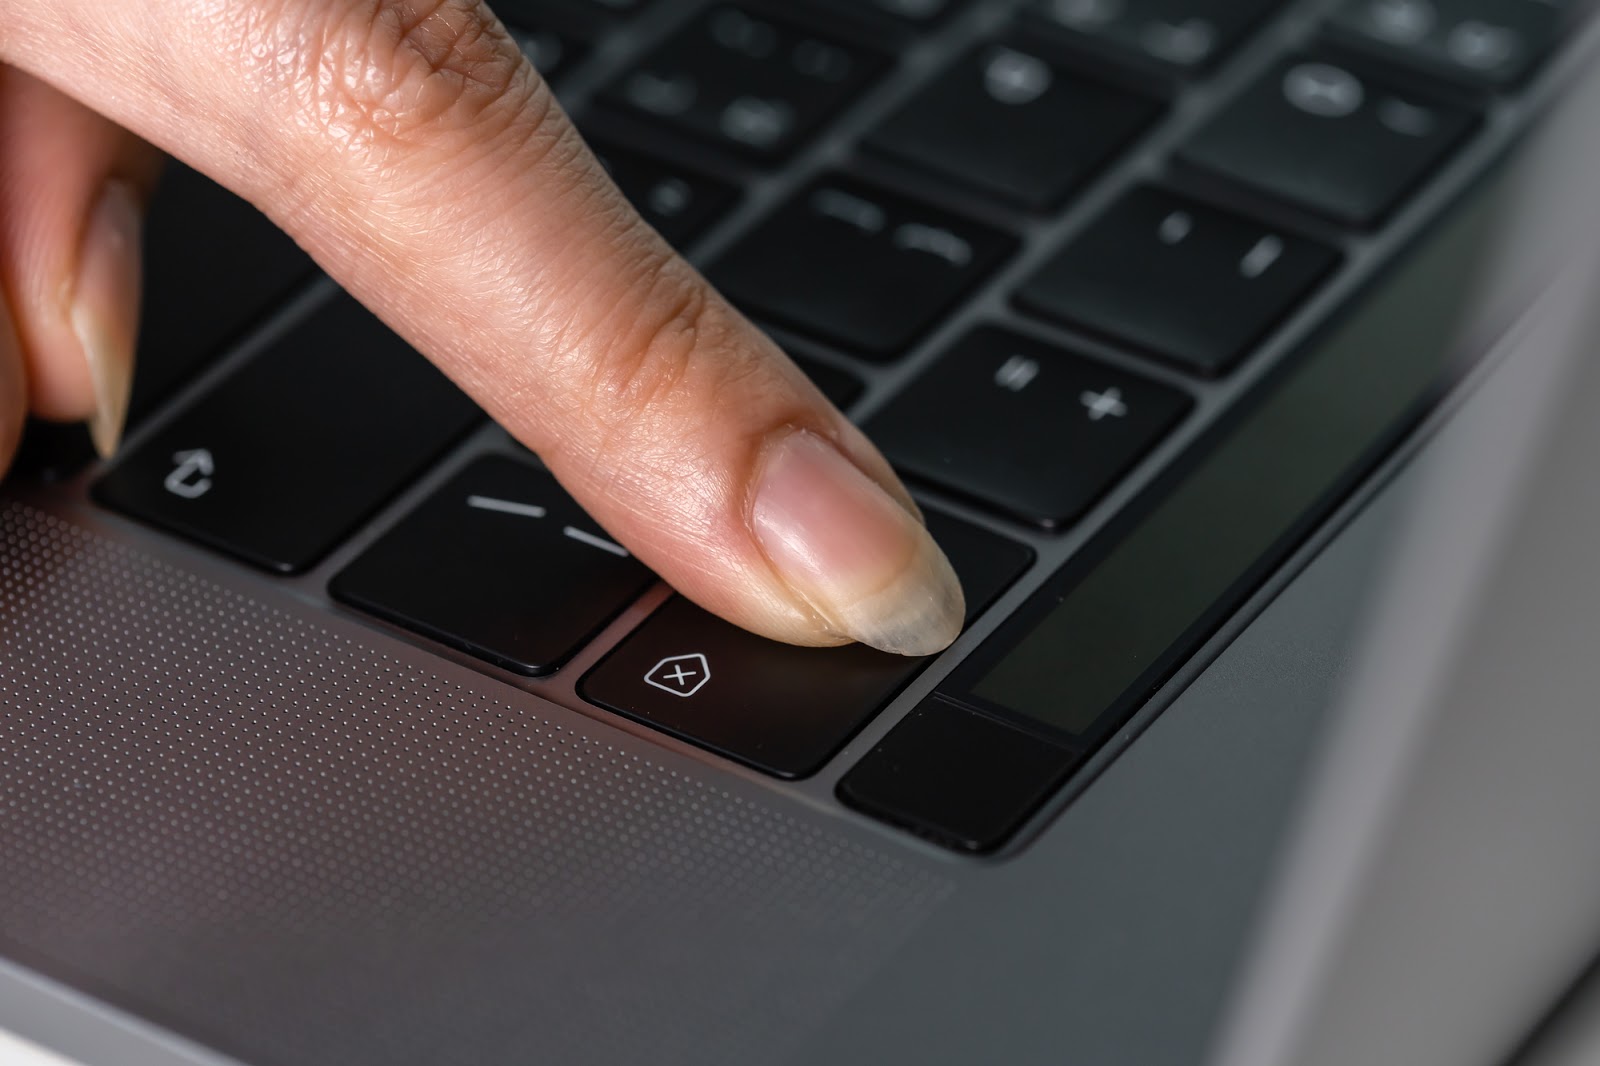 close-up female hand pressing a Backspace key for delete on a laptop keyboard